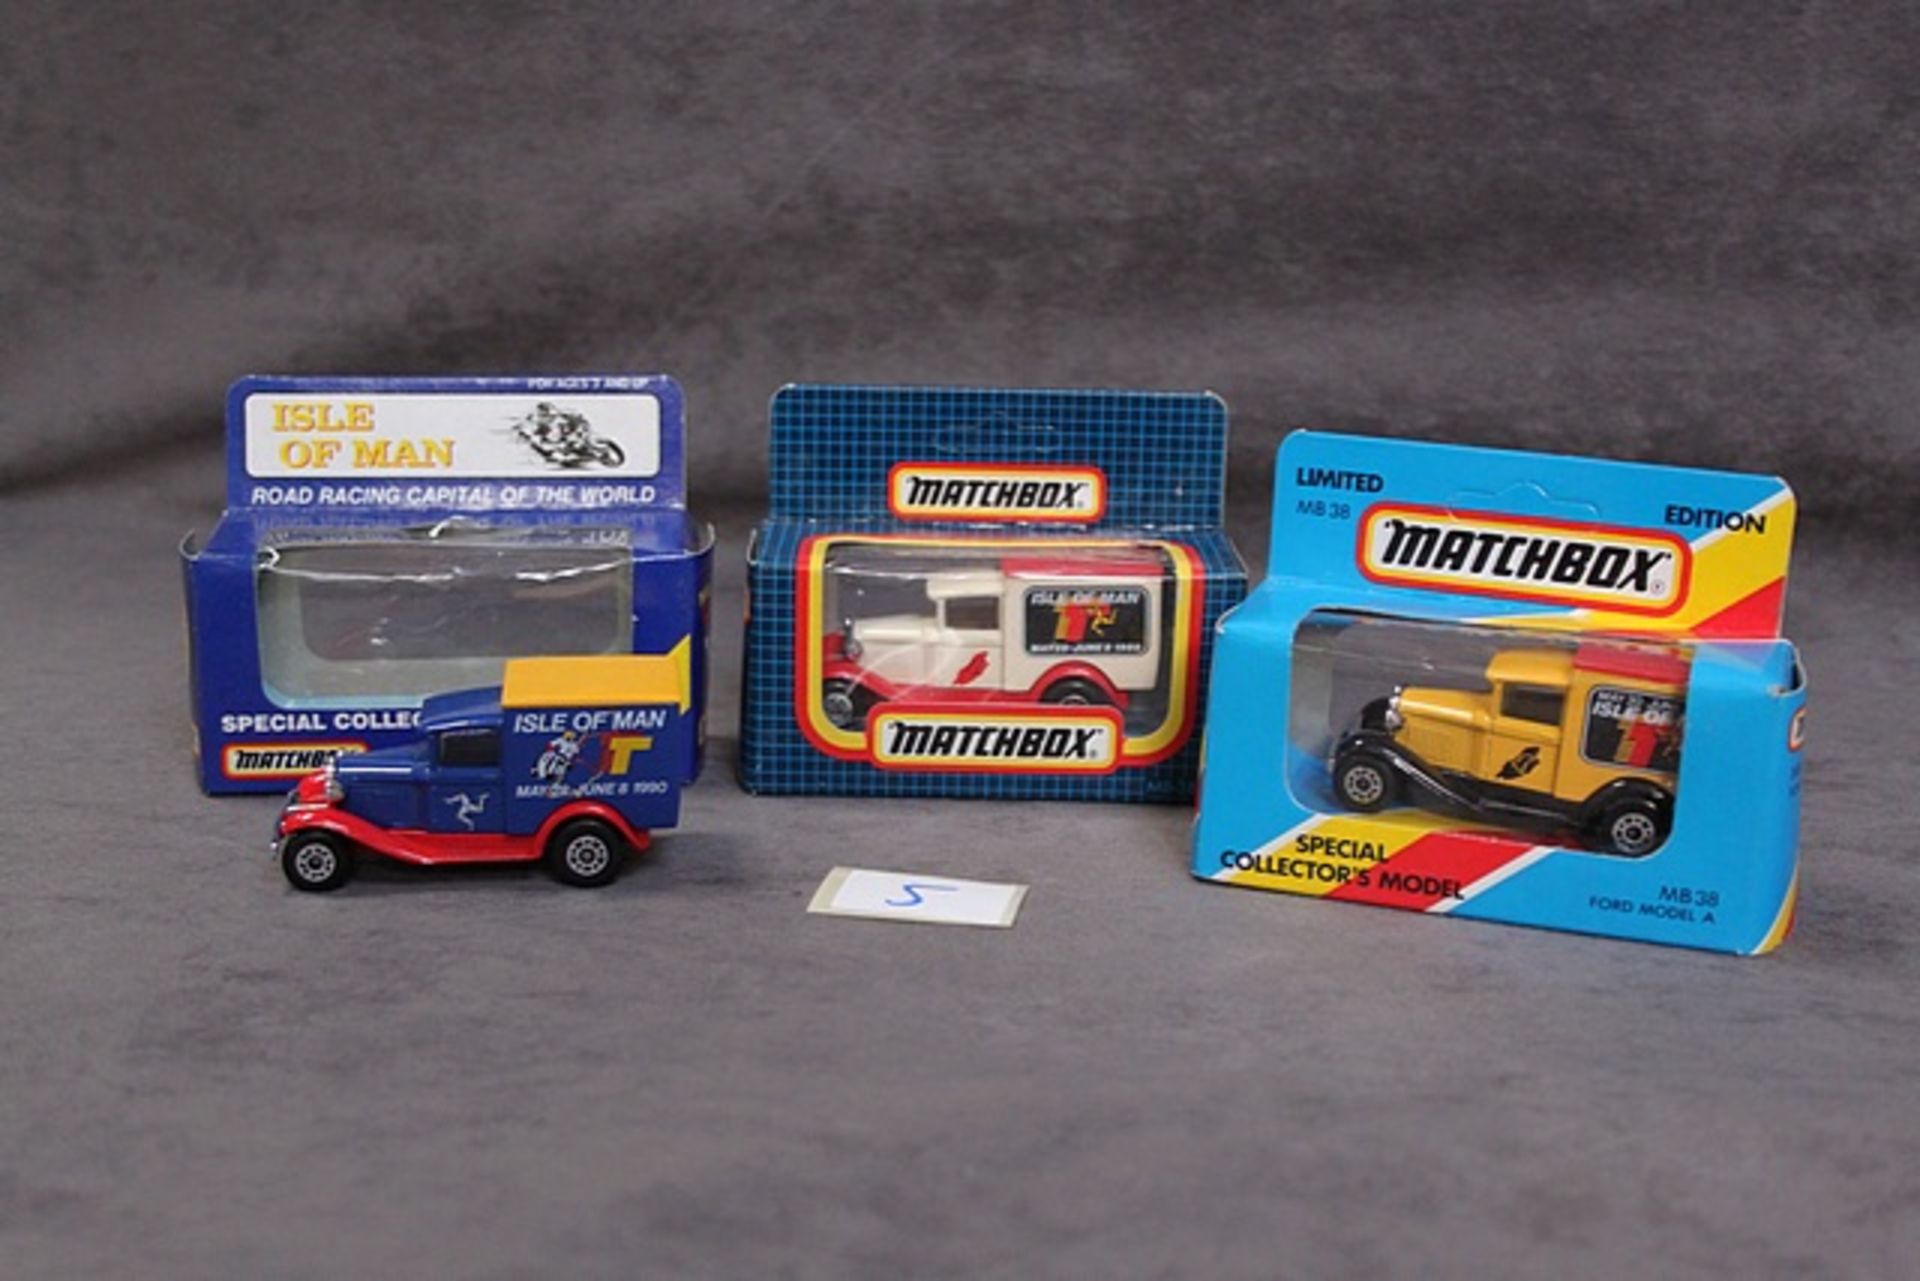 3 X Matchbox Diecast Models #38 Ford Model A Special Collectors Model 1988/1989 And 1990 Isle Of Man - Image 2 of 2